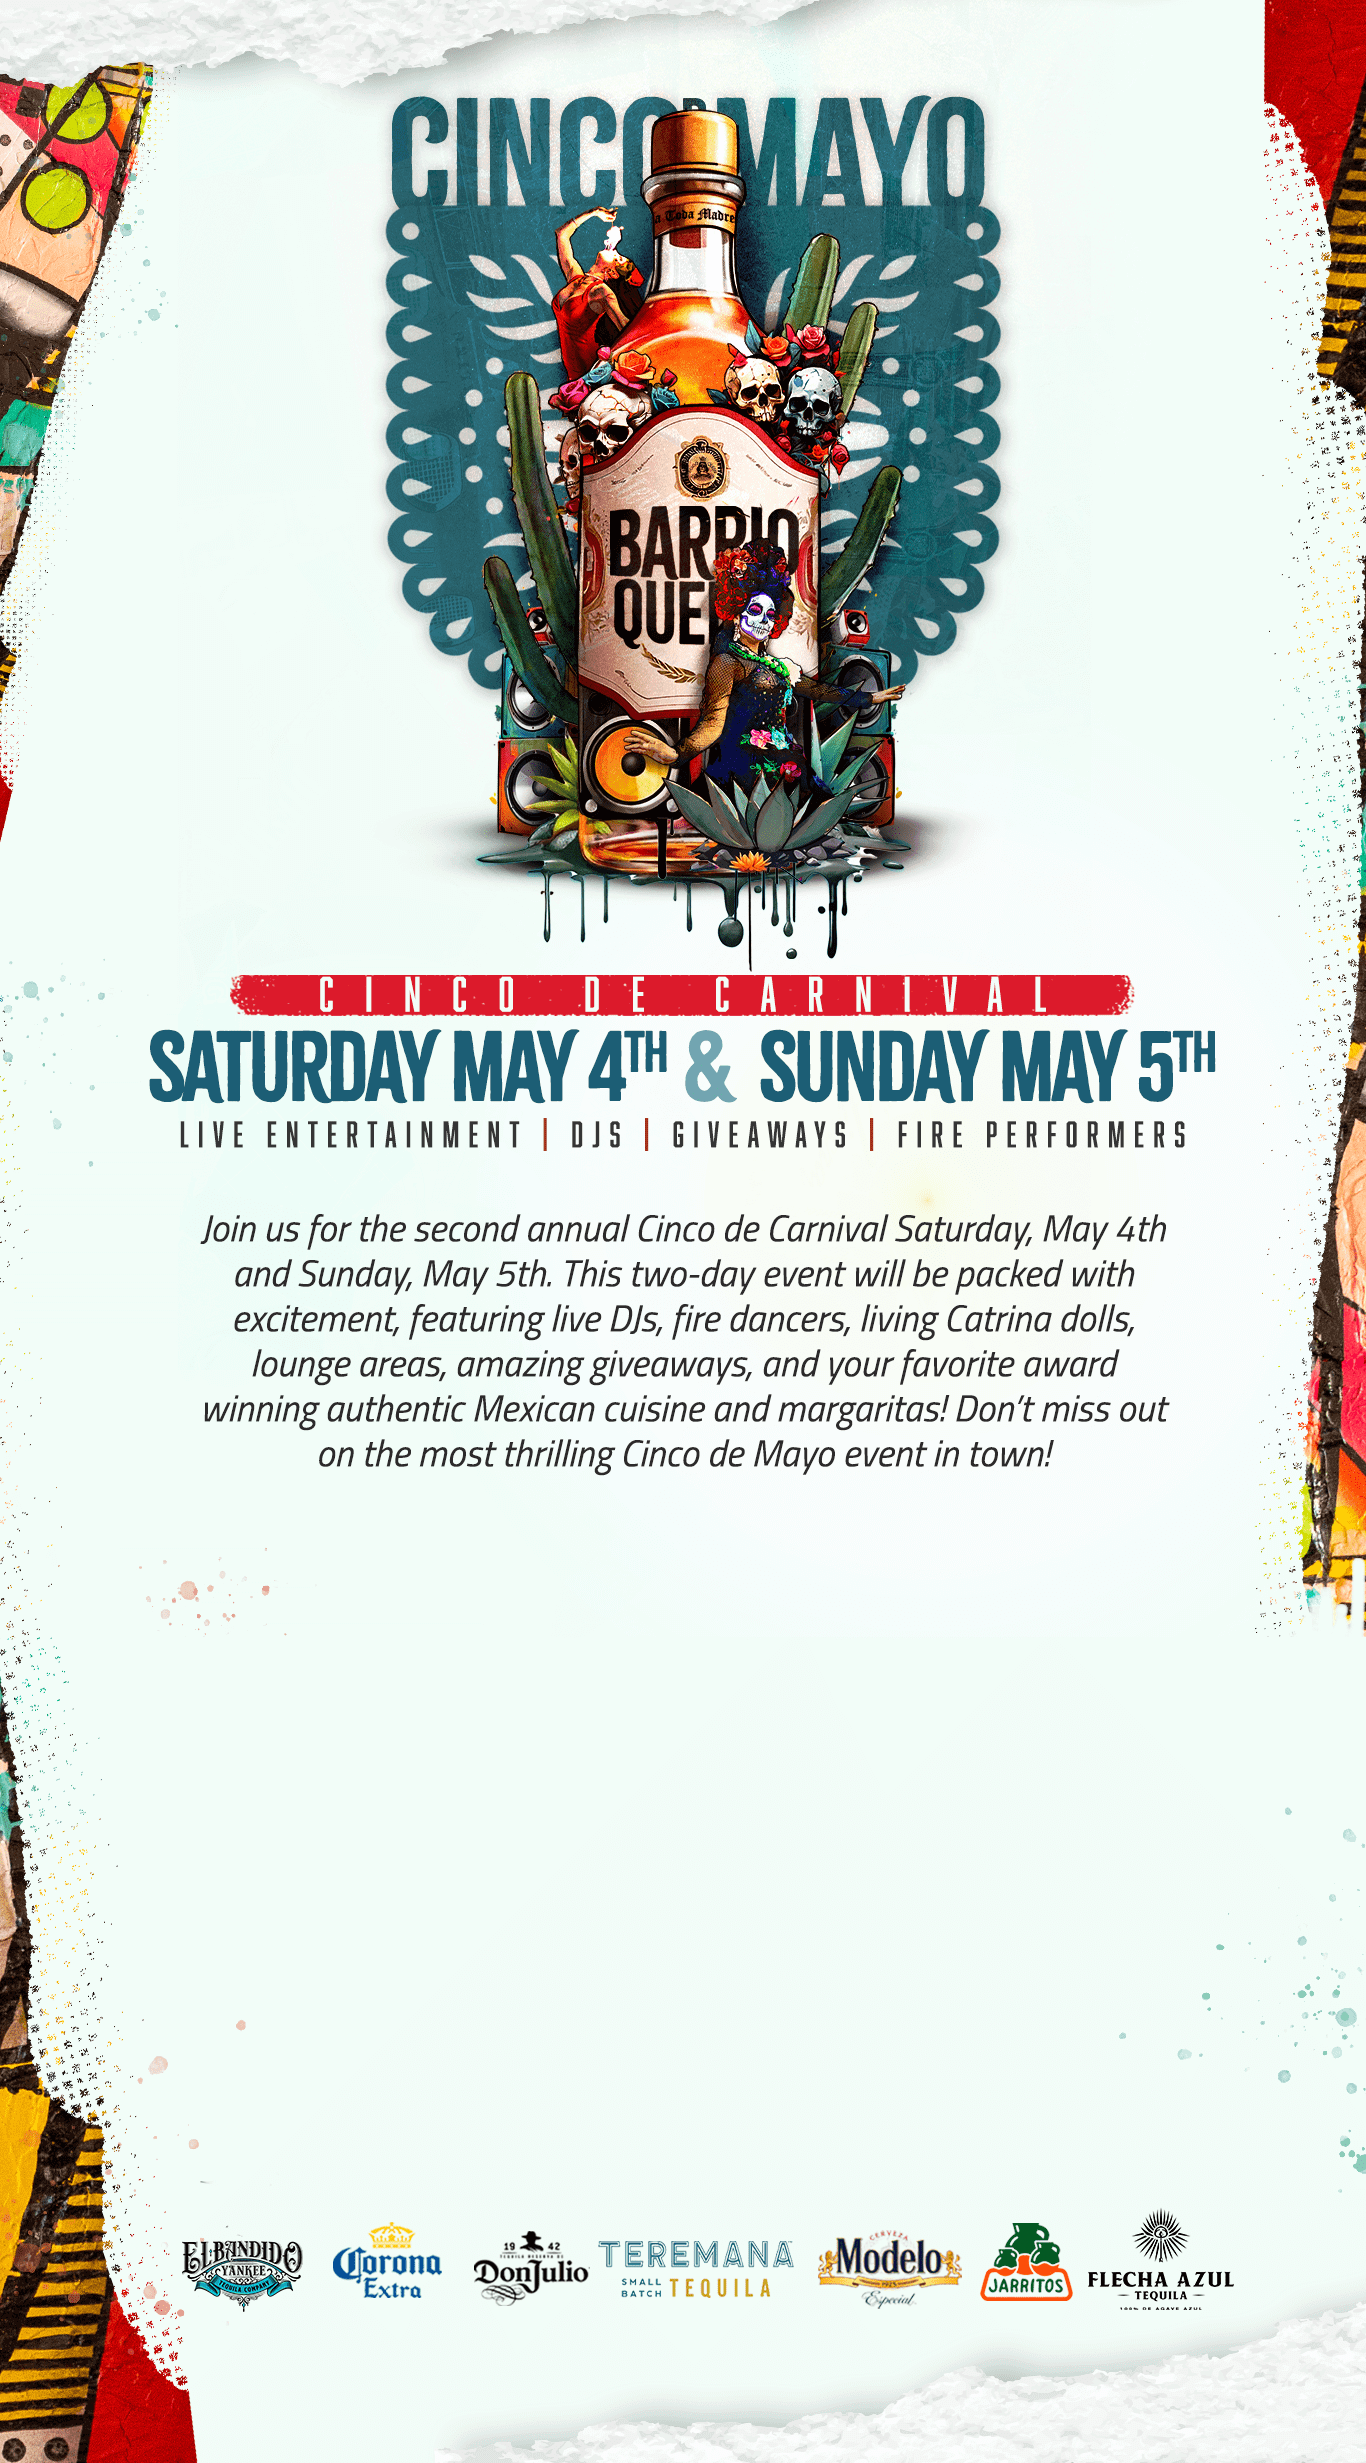 Details about Barrio Queen Cinco de Mayo party on May 4th and 5th.